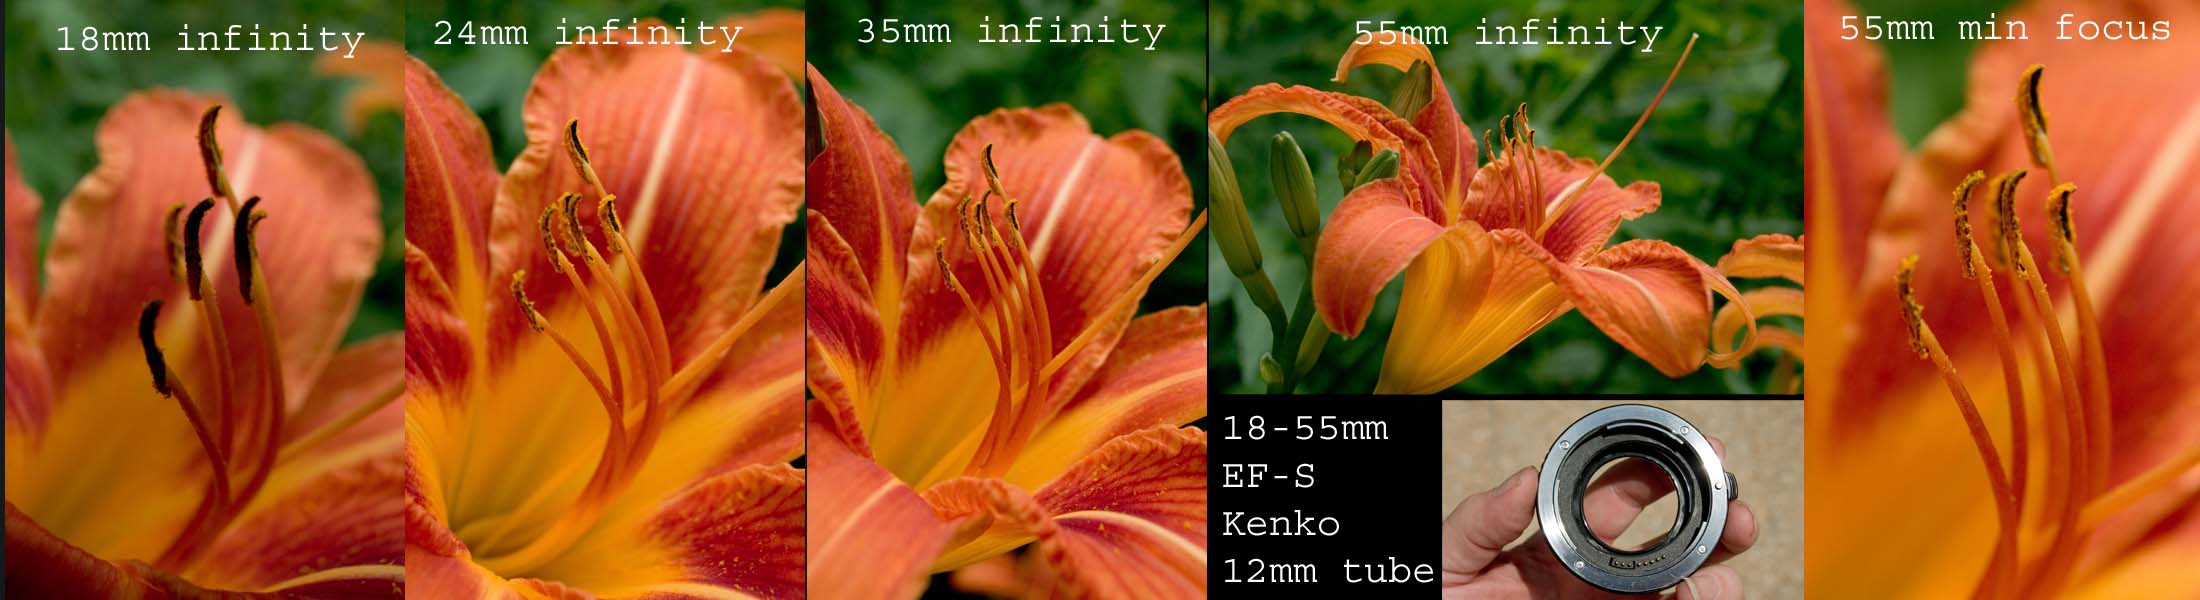 18-55mm f/3.5-5.6 EF-S with Kenko 12mm  tube